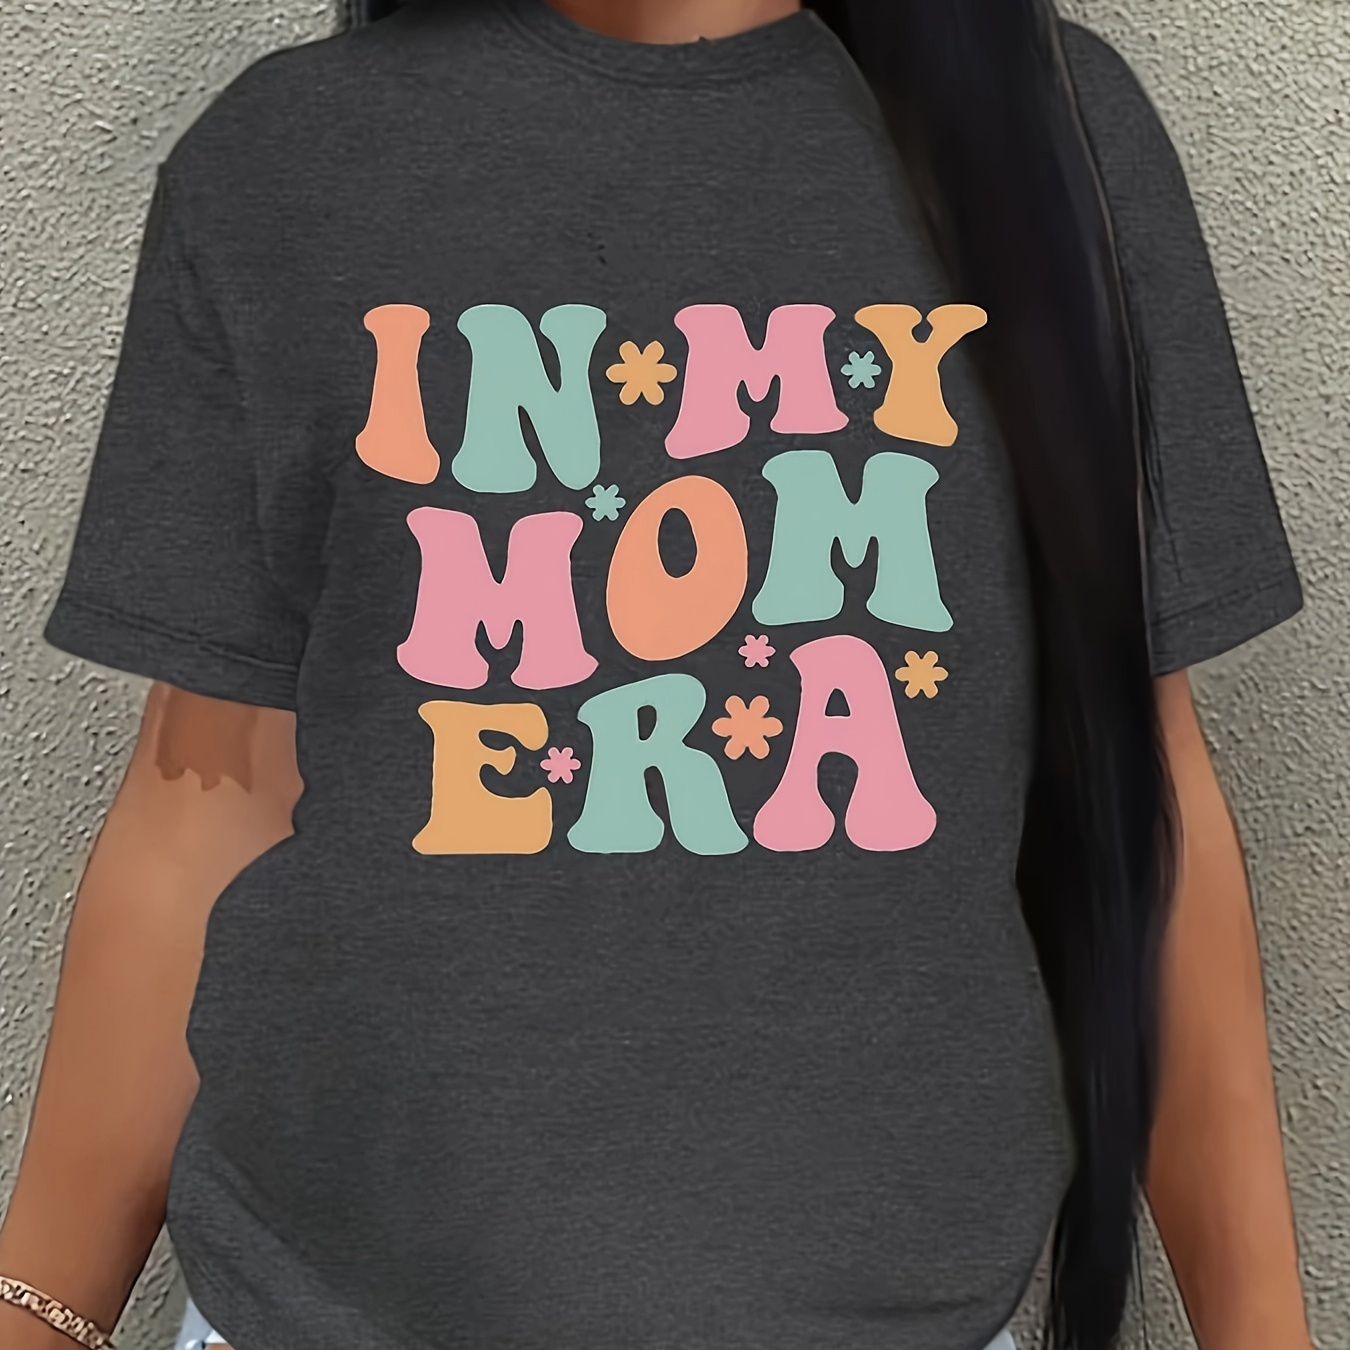 

Mom Era Print Crew Neck T-shirt, Short Sleeve Casual Top For Spring & Summer, Women's Clothing